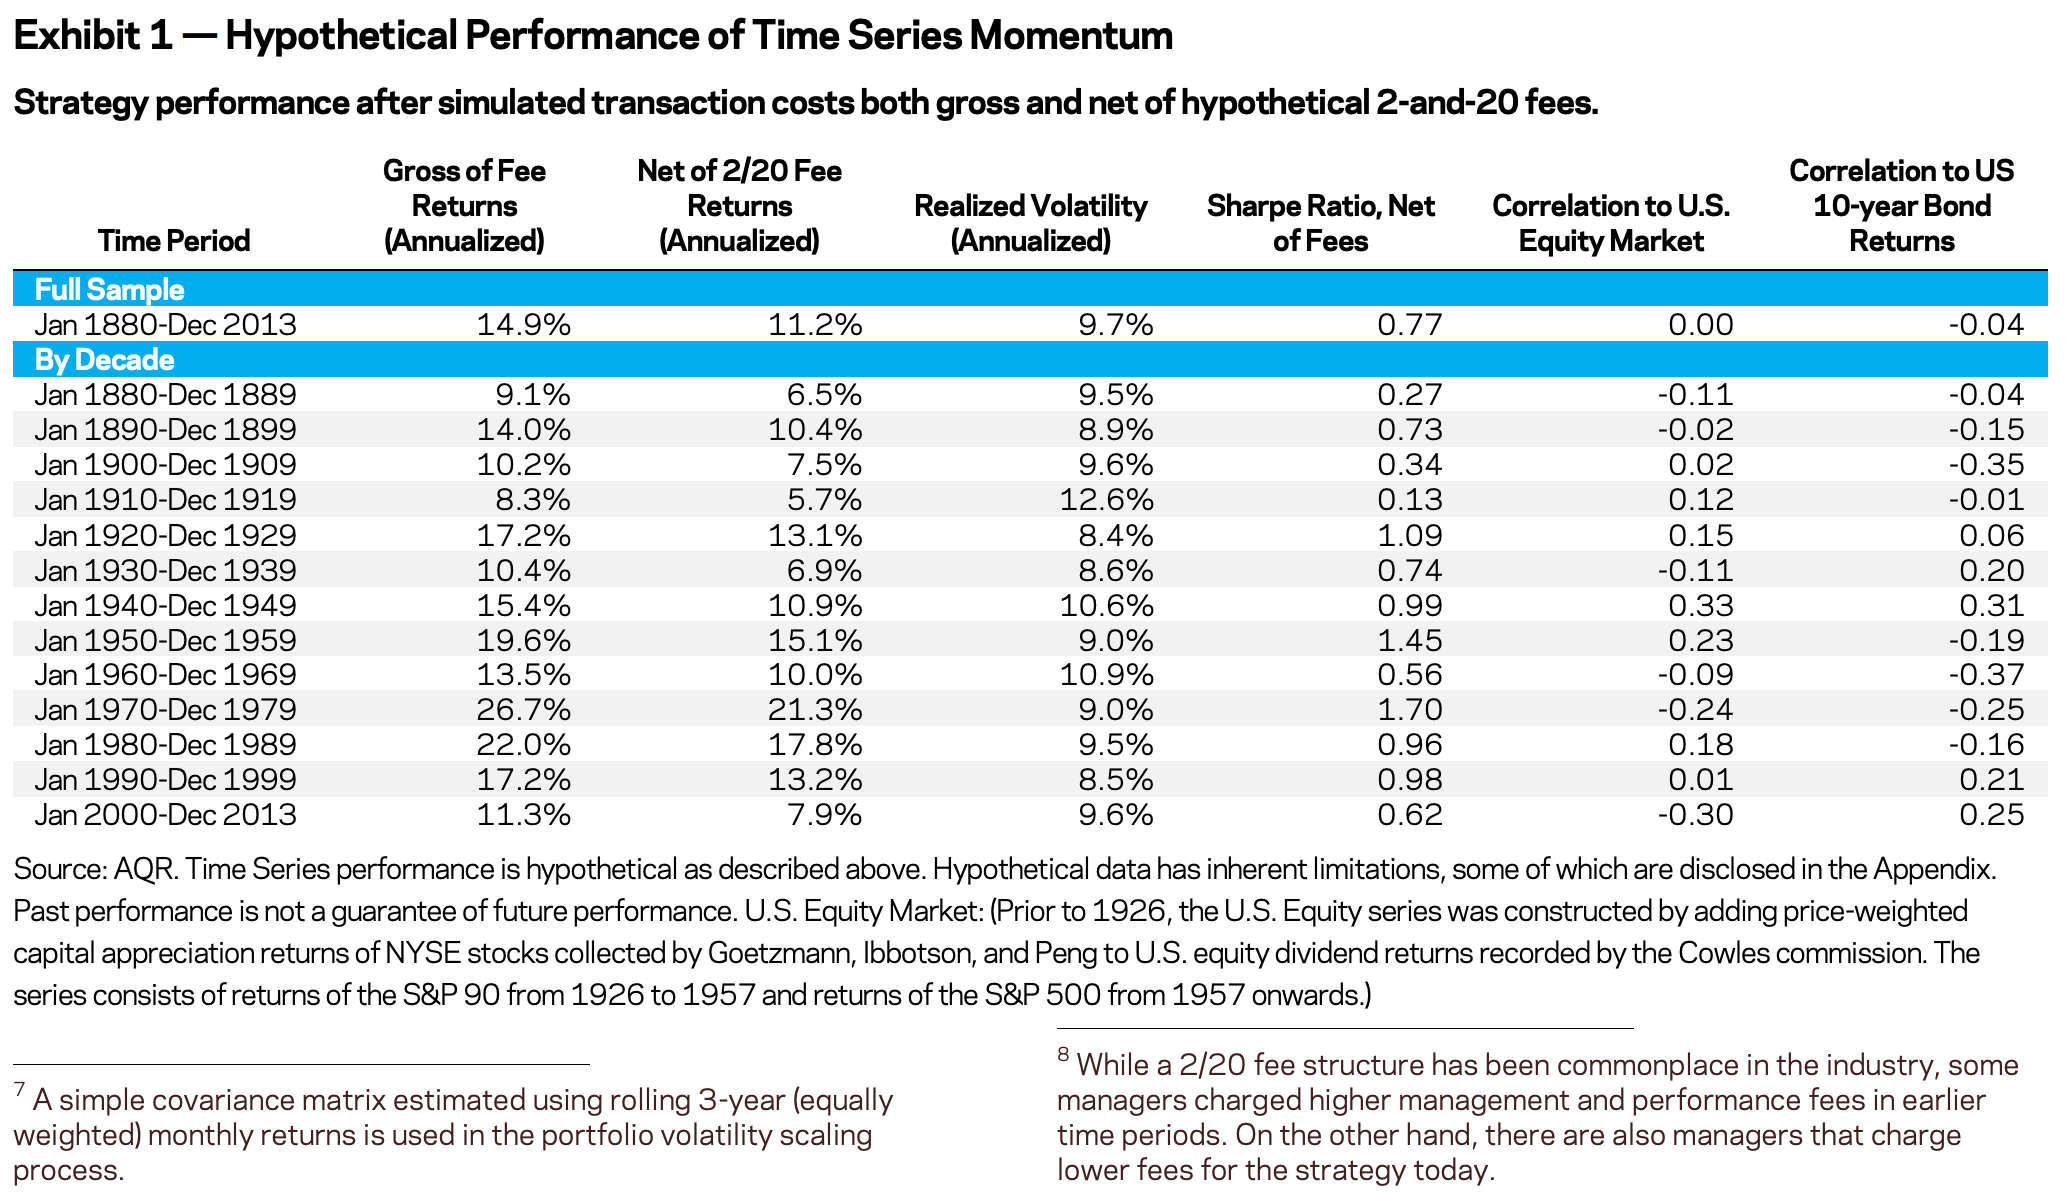 Hypothetical performance of Trend Following Managed Futures strategies from 1880 until 2013 